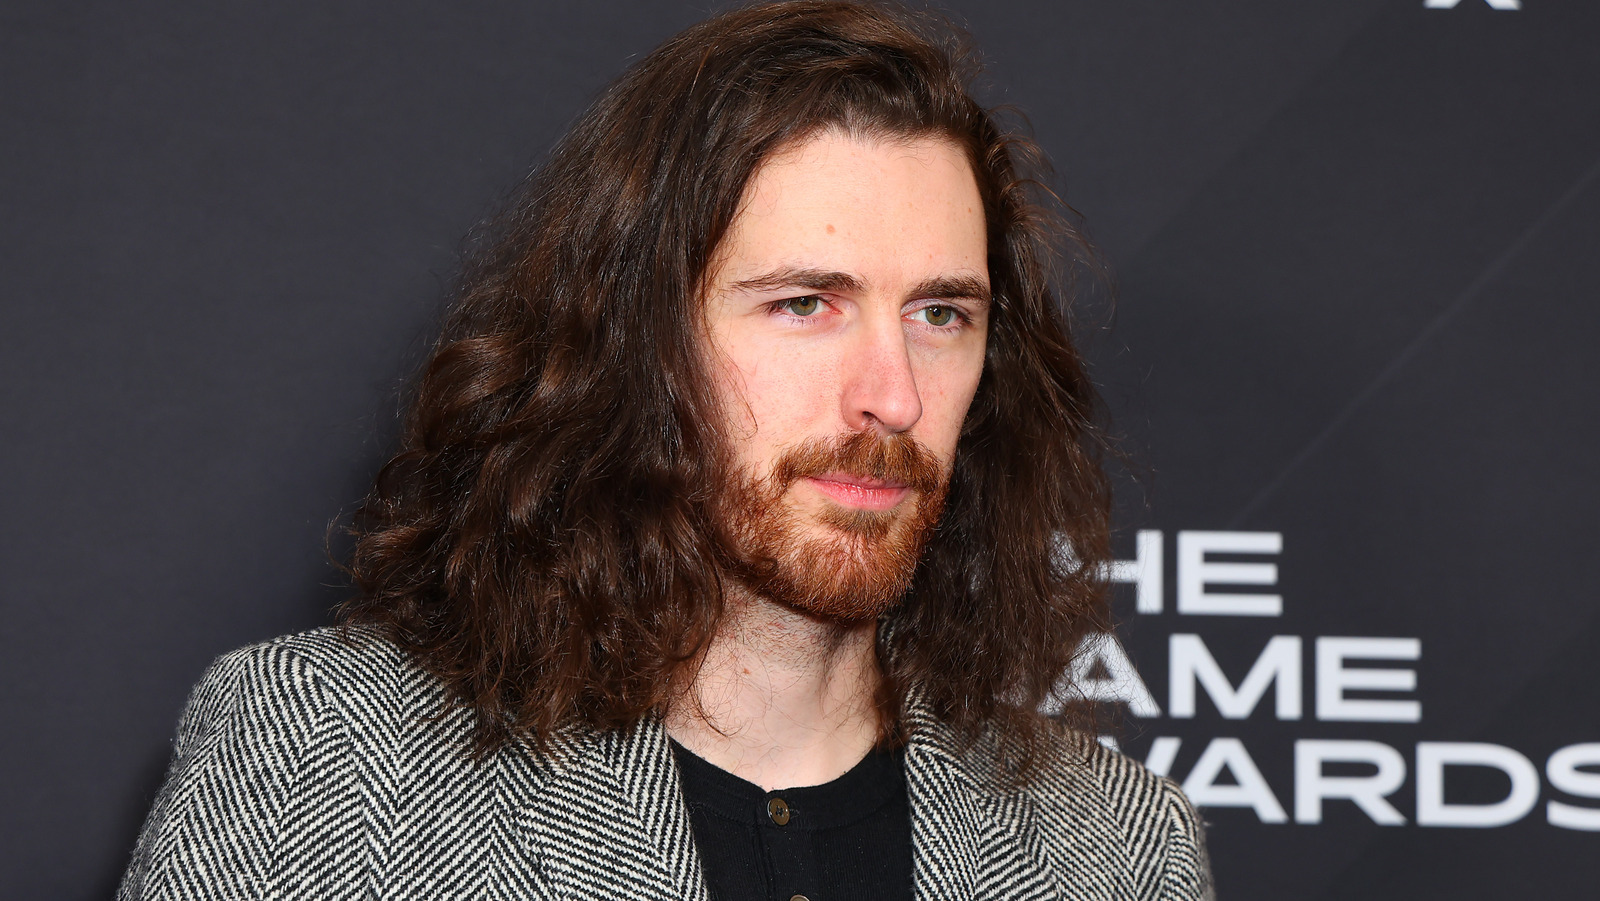 Is Hozier Married? What We Know About The Musician's Private Love Life